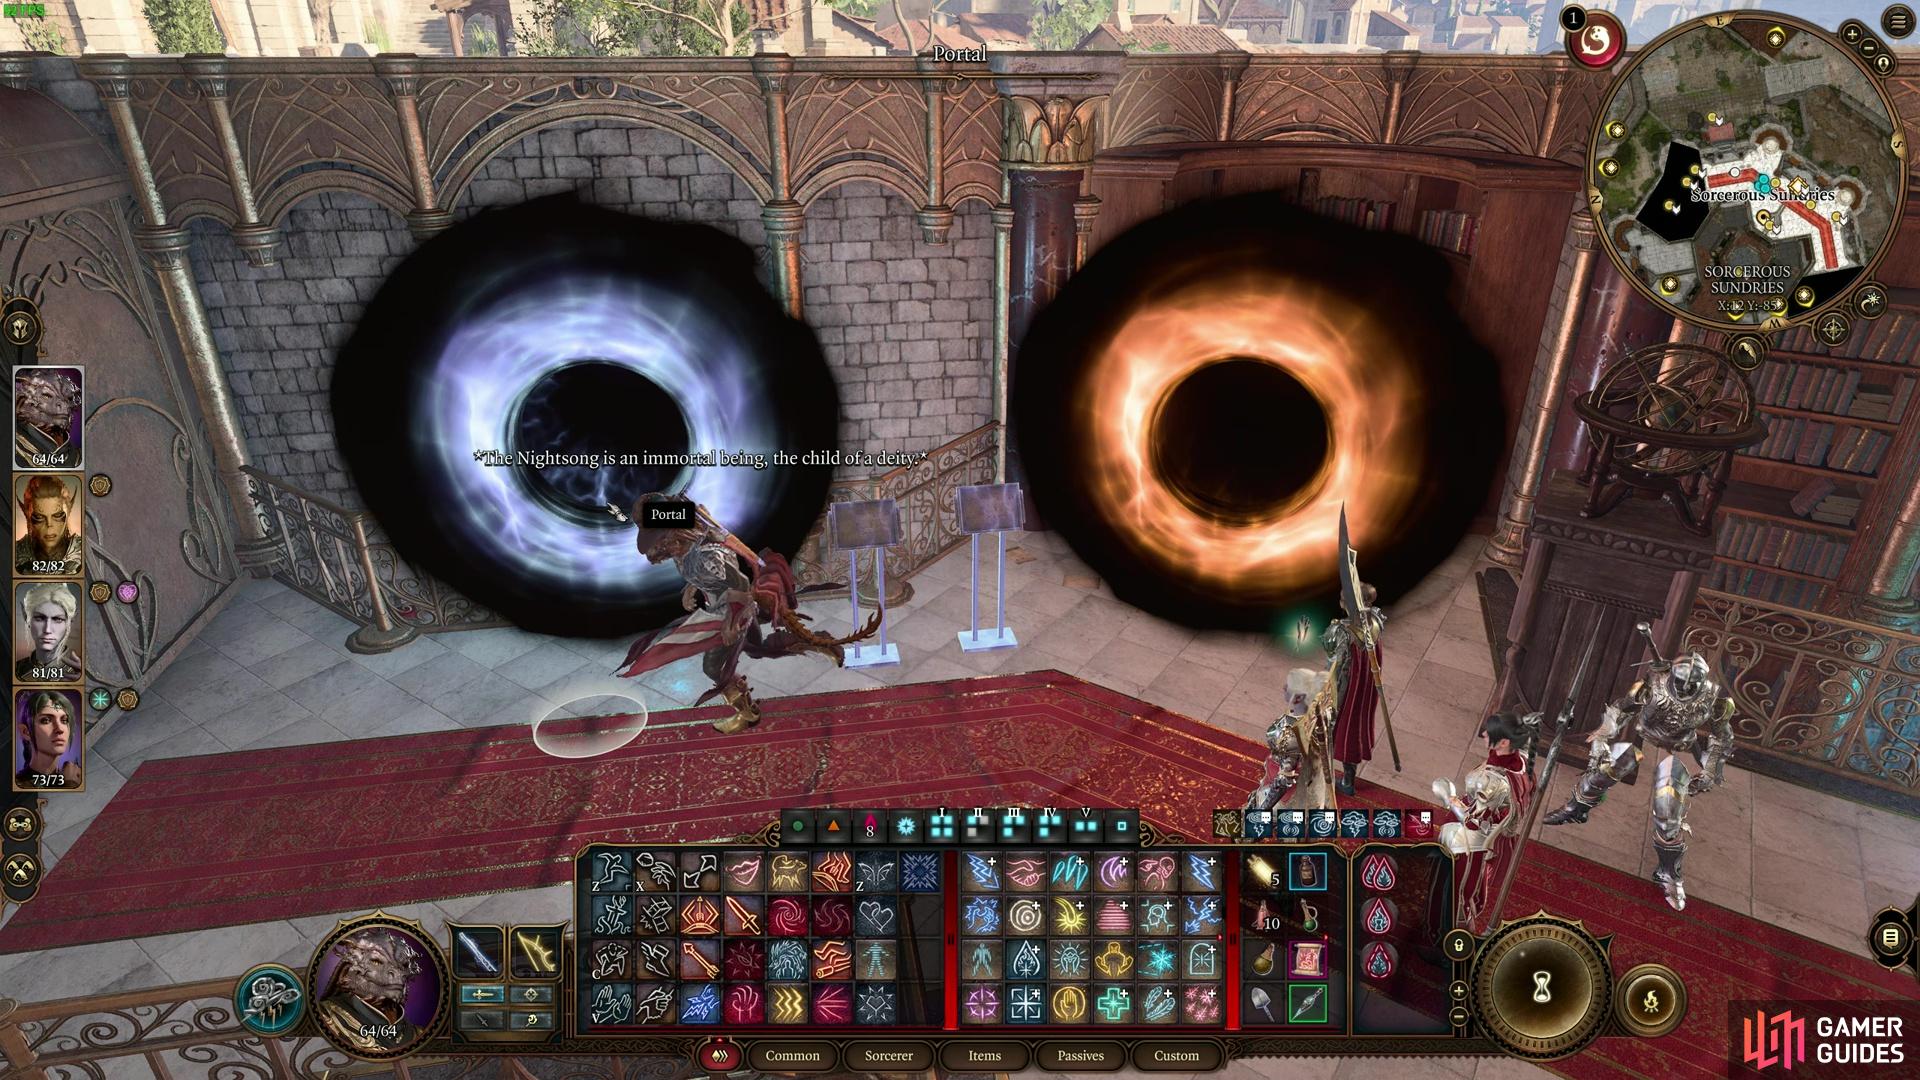 Baldur's Gate 3 players can miss out on a climactic battle in Act